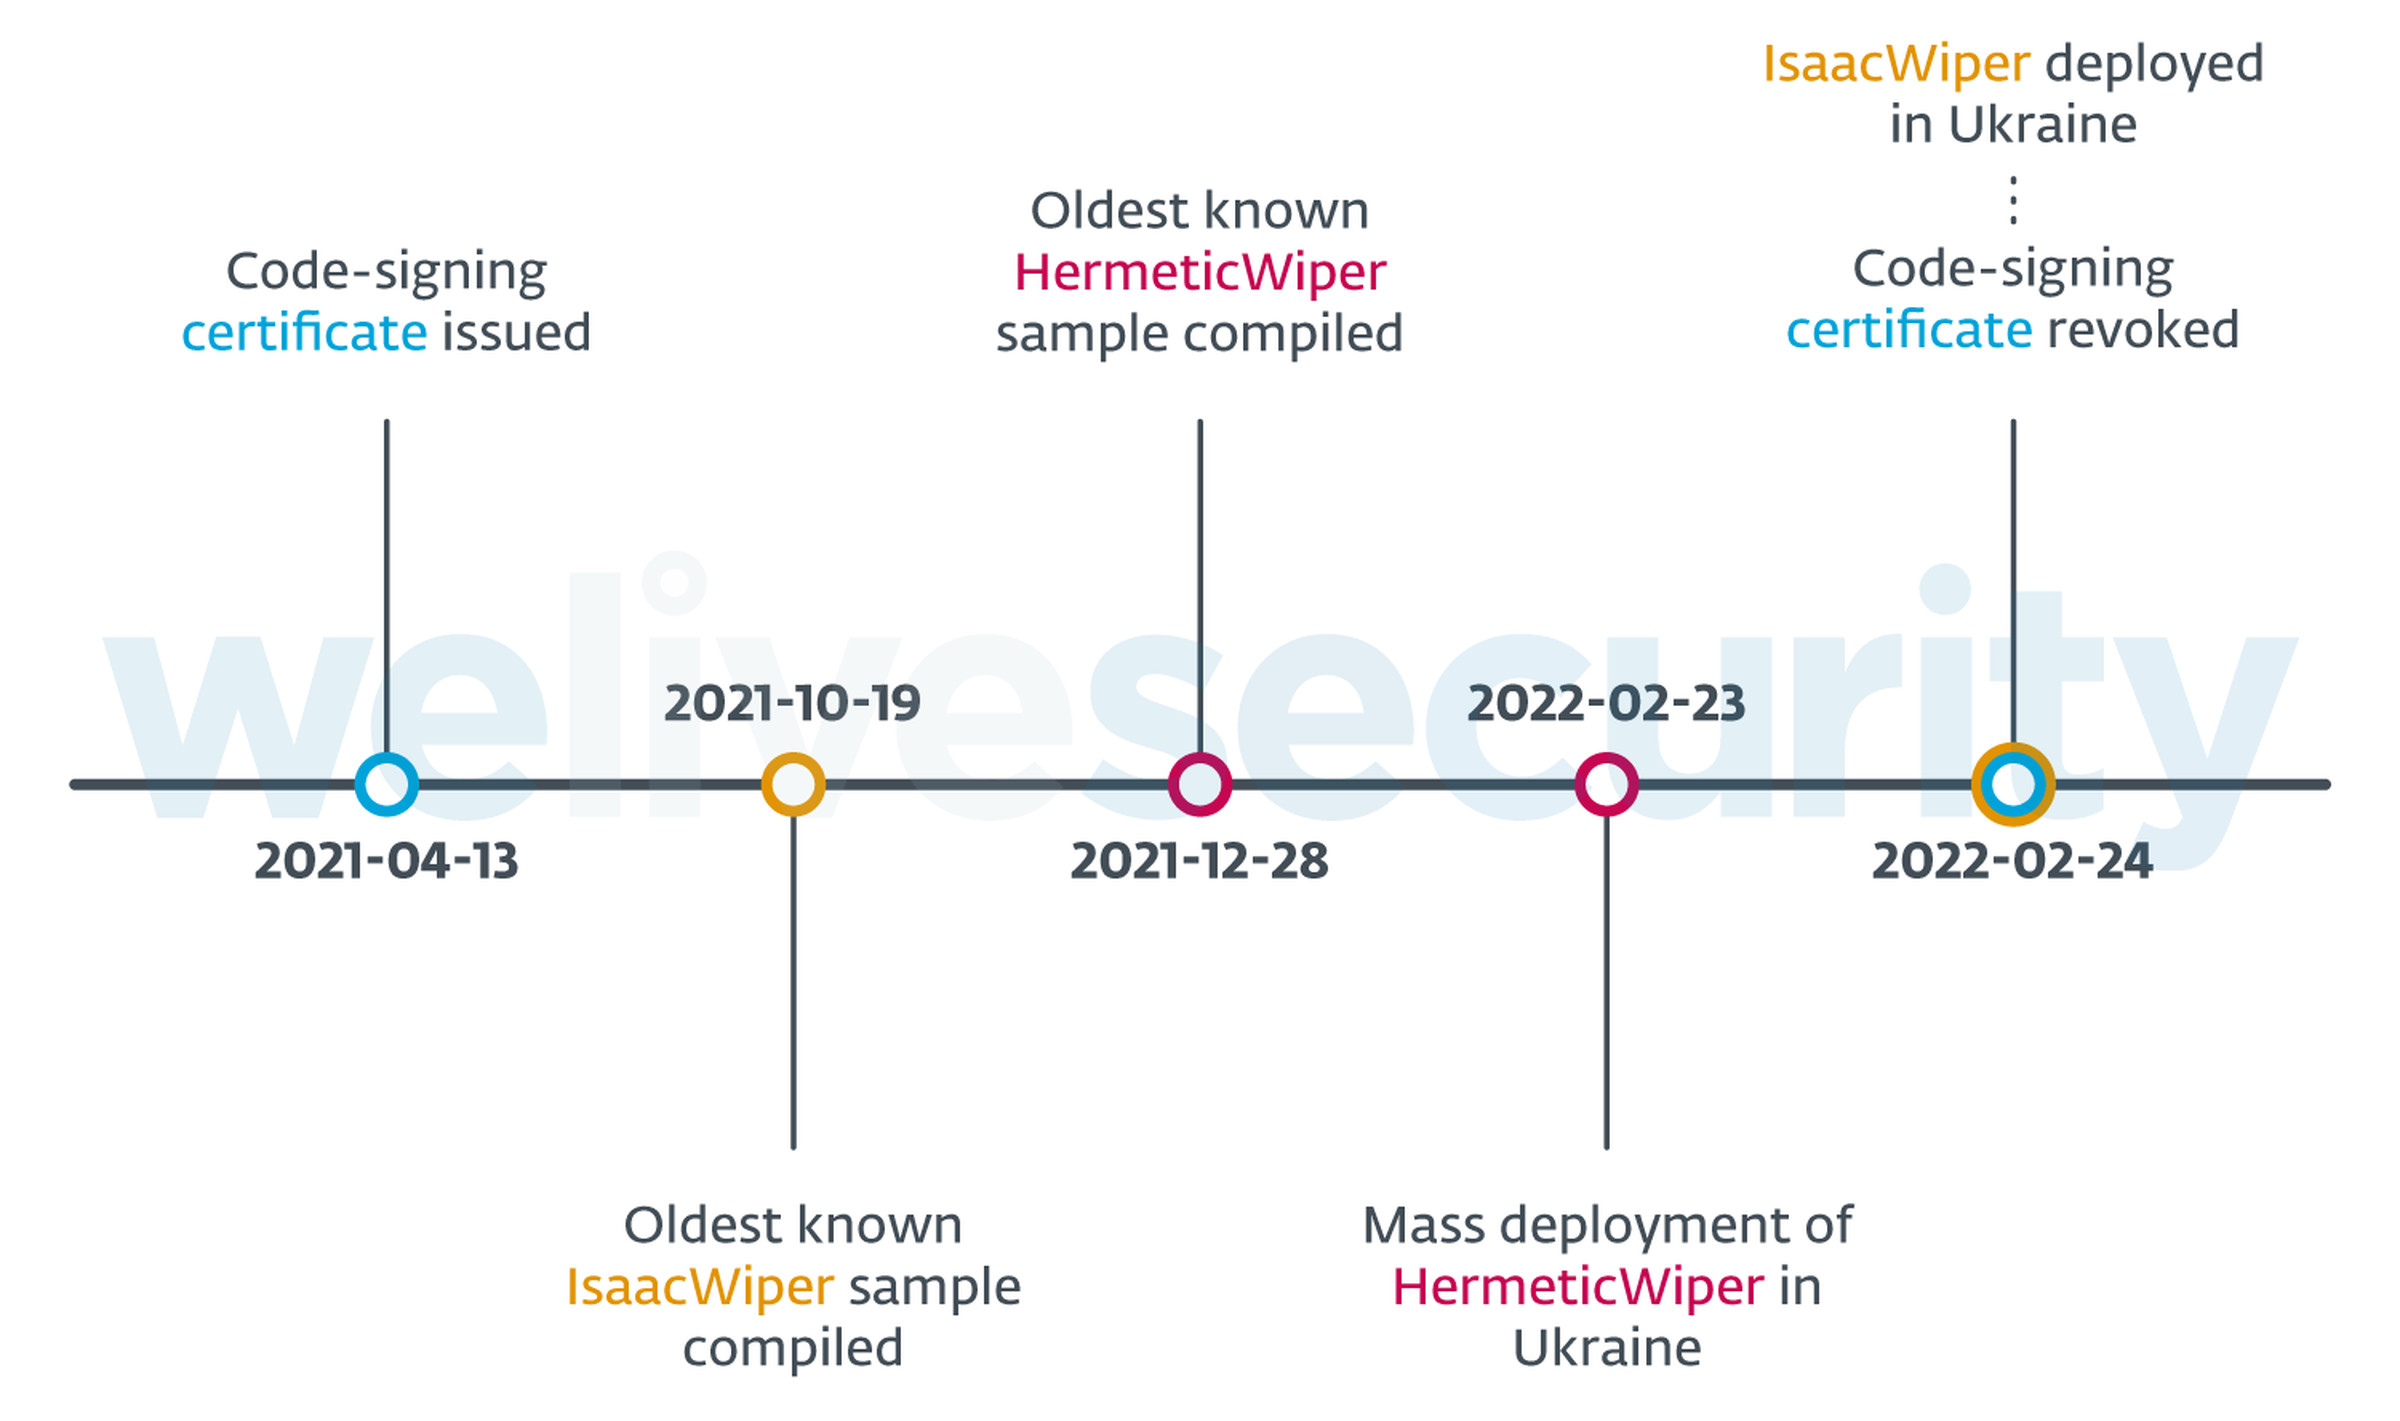 Timeline showing the development of IsaacWiper and HermeticWiper, with the oldest known samples compiled in October 2021 and December 2021 respectively